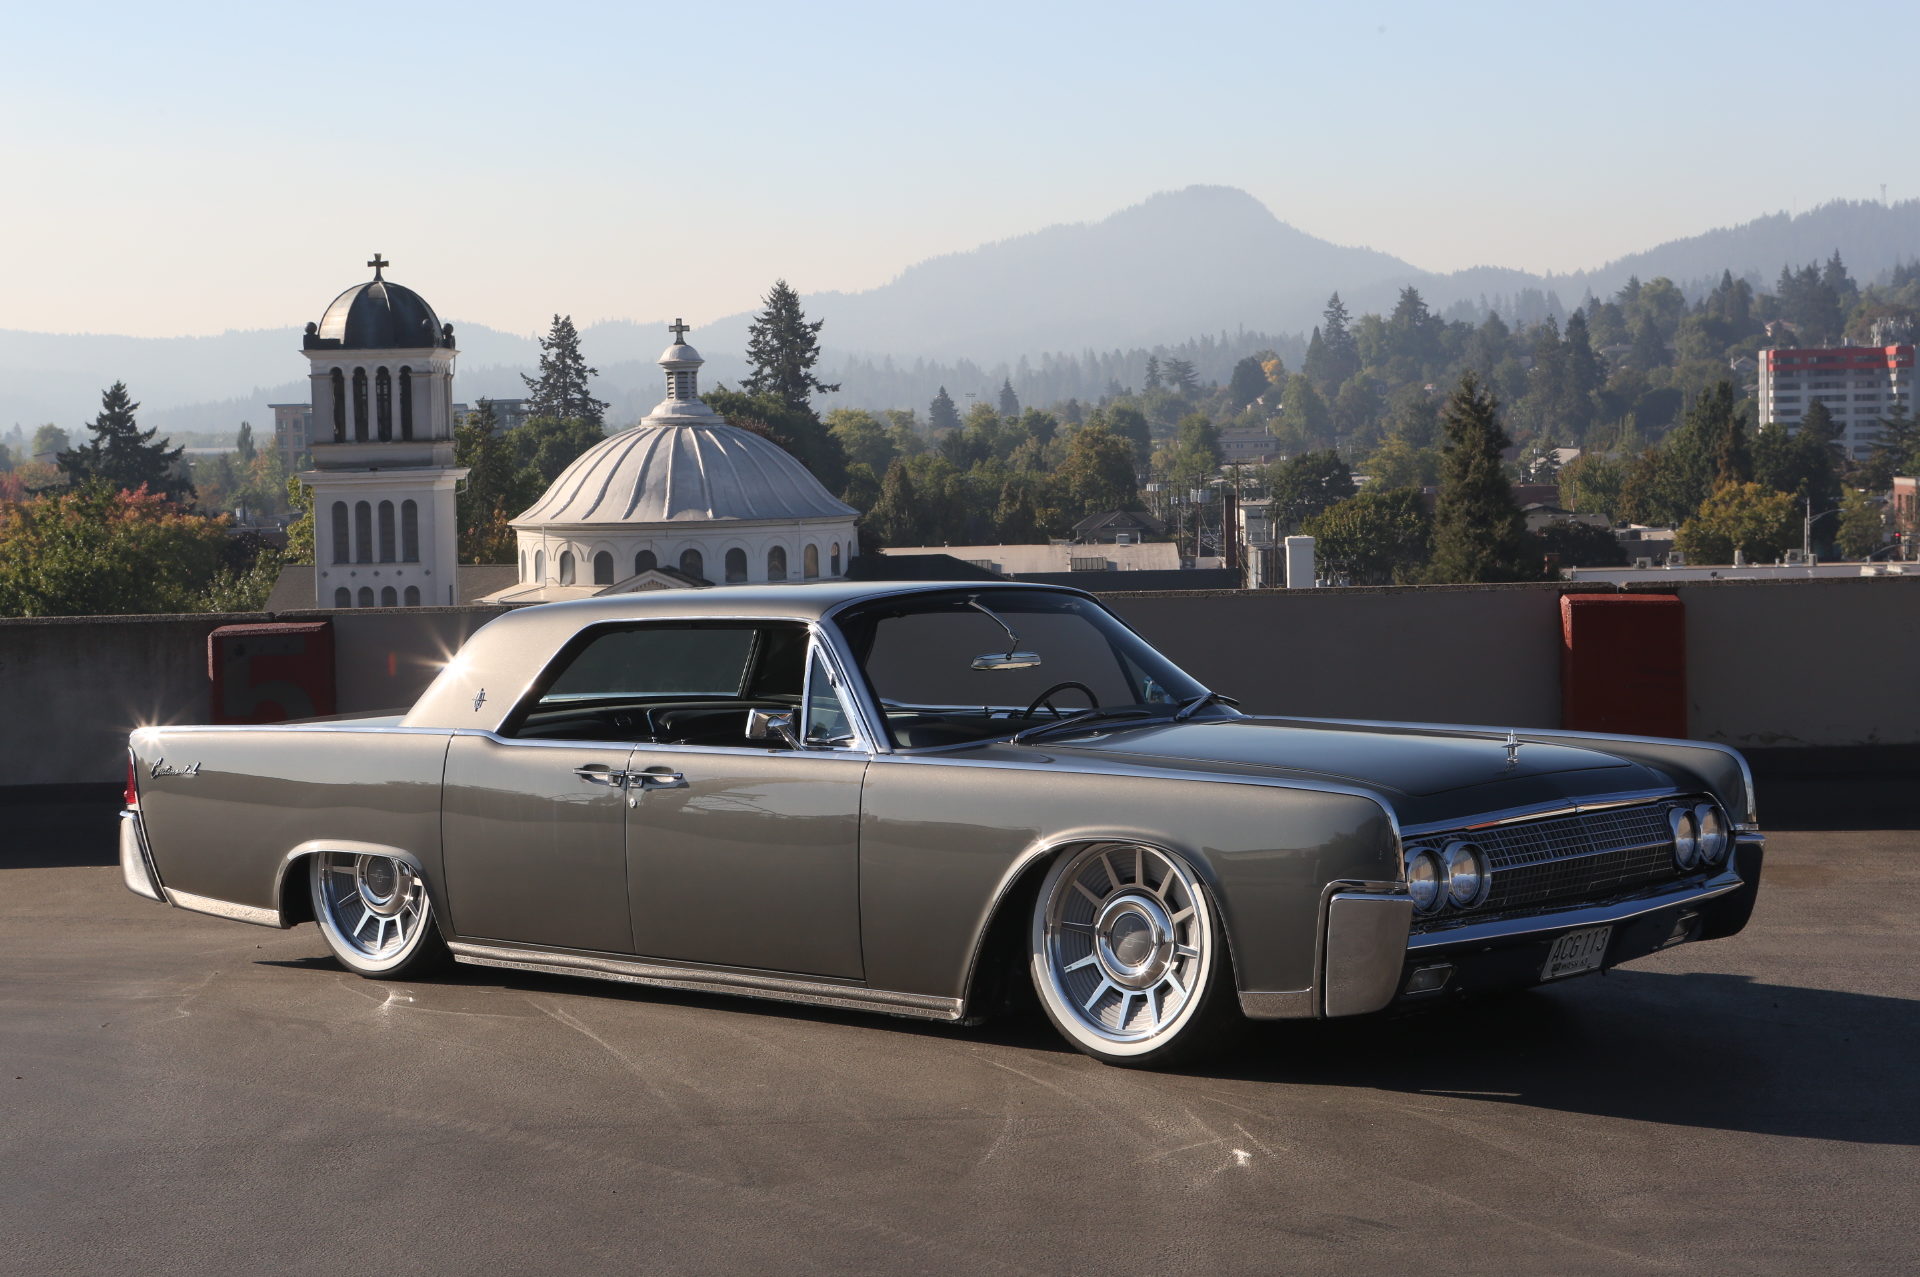 1963 Lincoln Continental - MetalWorks Classic Auto Restoration & Speed Shop